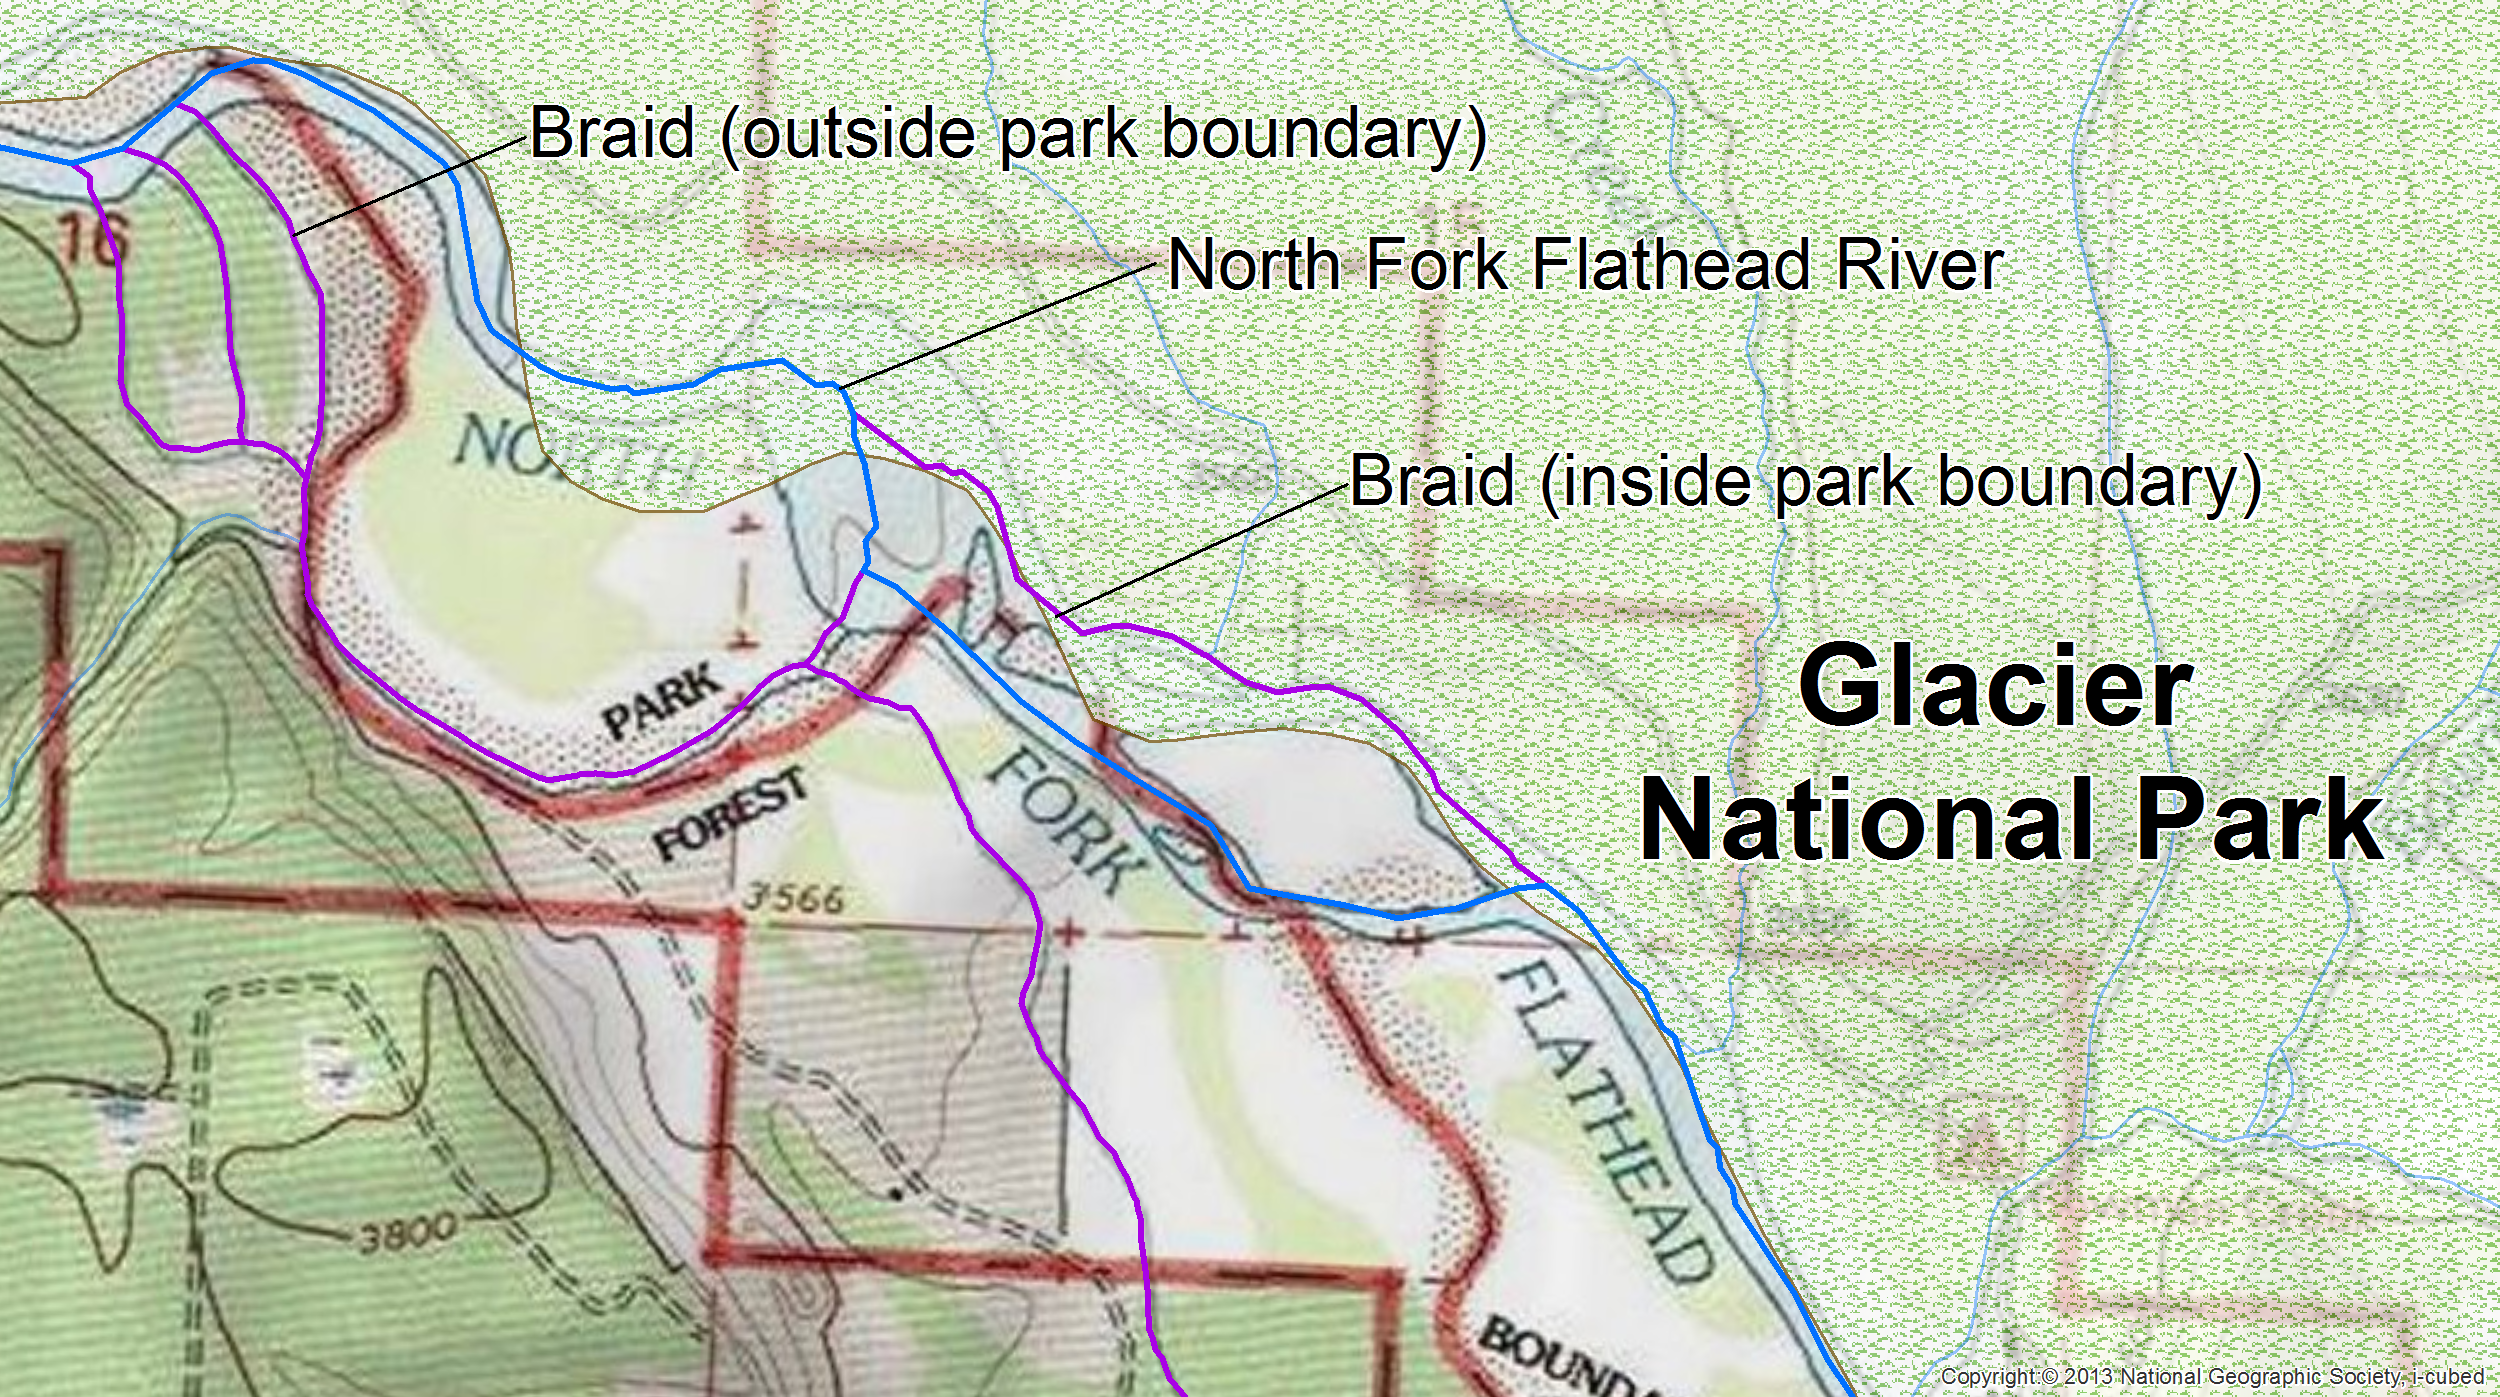 The North Fork Flathead River contains several braids (purple), some of which are outside of the park boundary. While the entire river system was attributed as adjacent, only the mainstem (blue) was tagged as centerline.